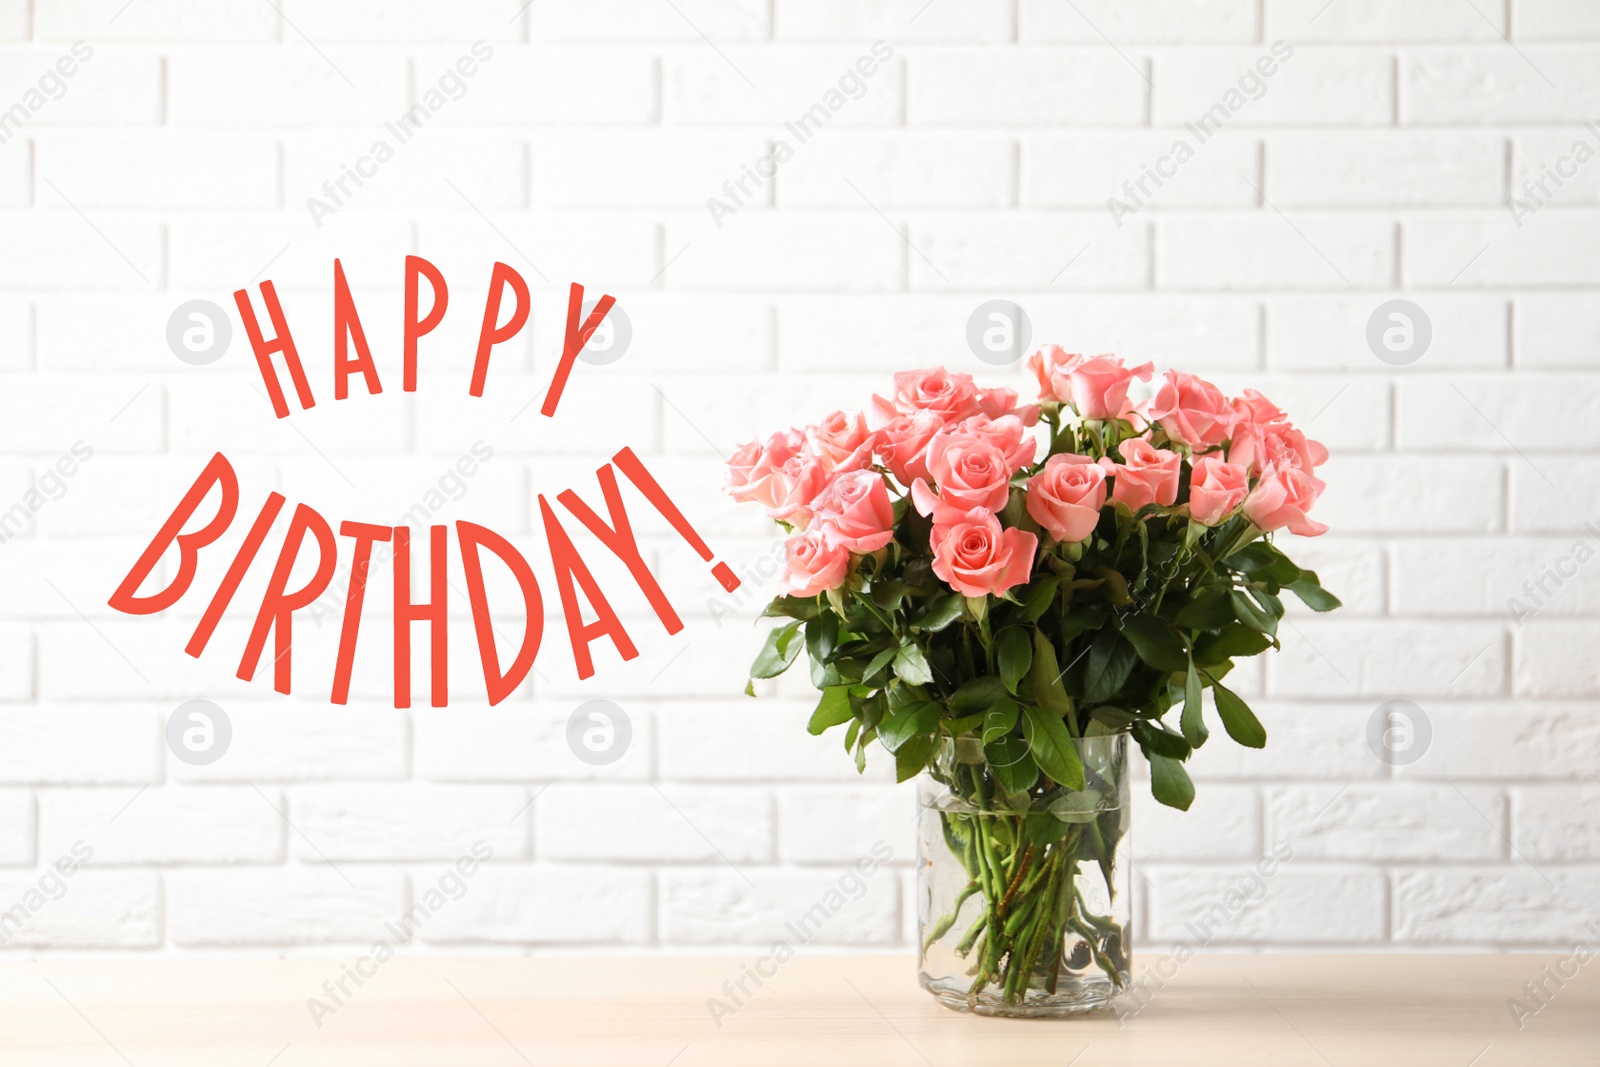 Image of Happy Birthday! Vase with beautiful rose flowers on table near white brick wall 